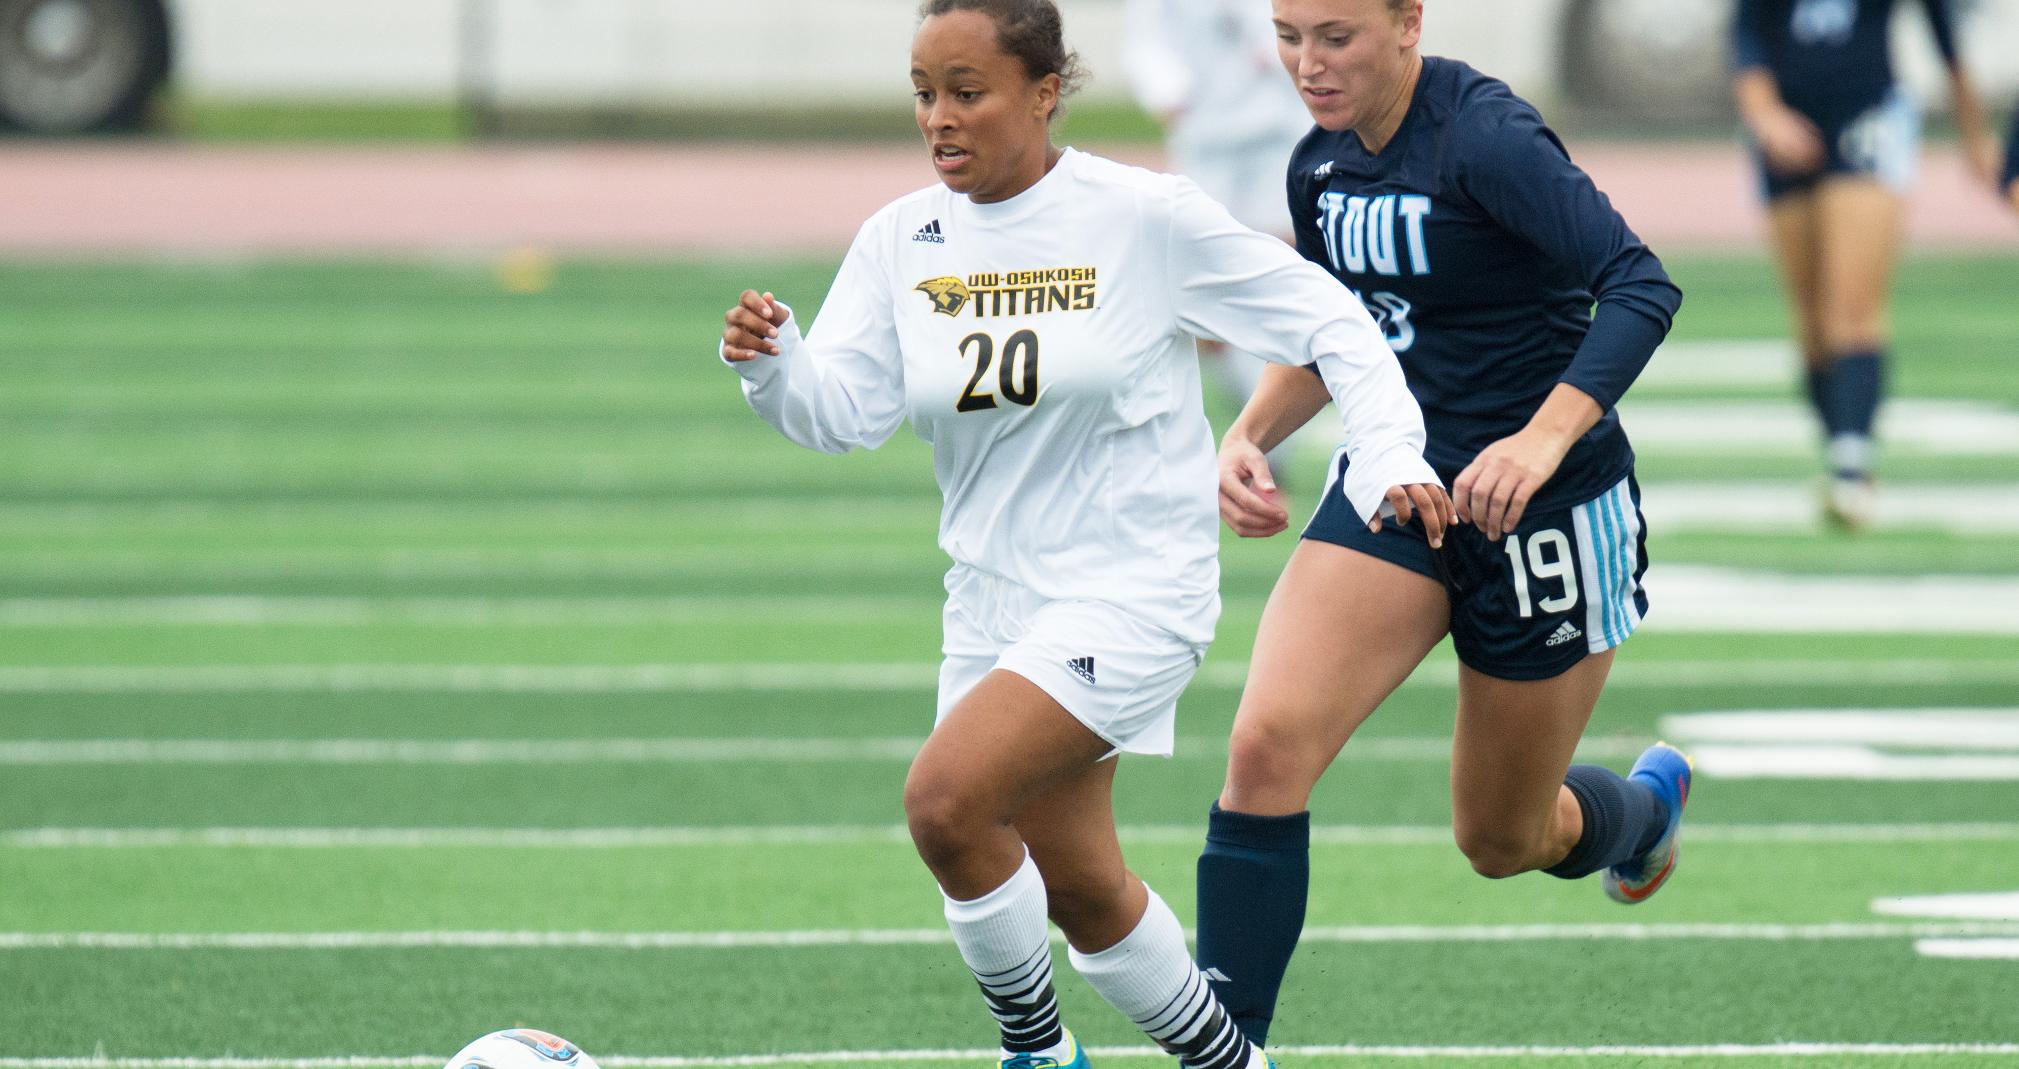 AJ Jackson gave UW-Oshkosh a 1-0 lead during the final minute of the first half.